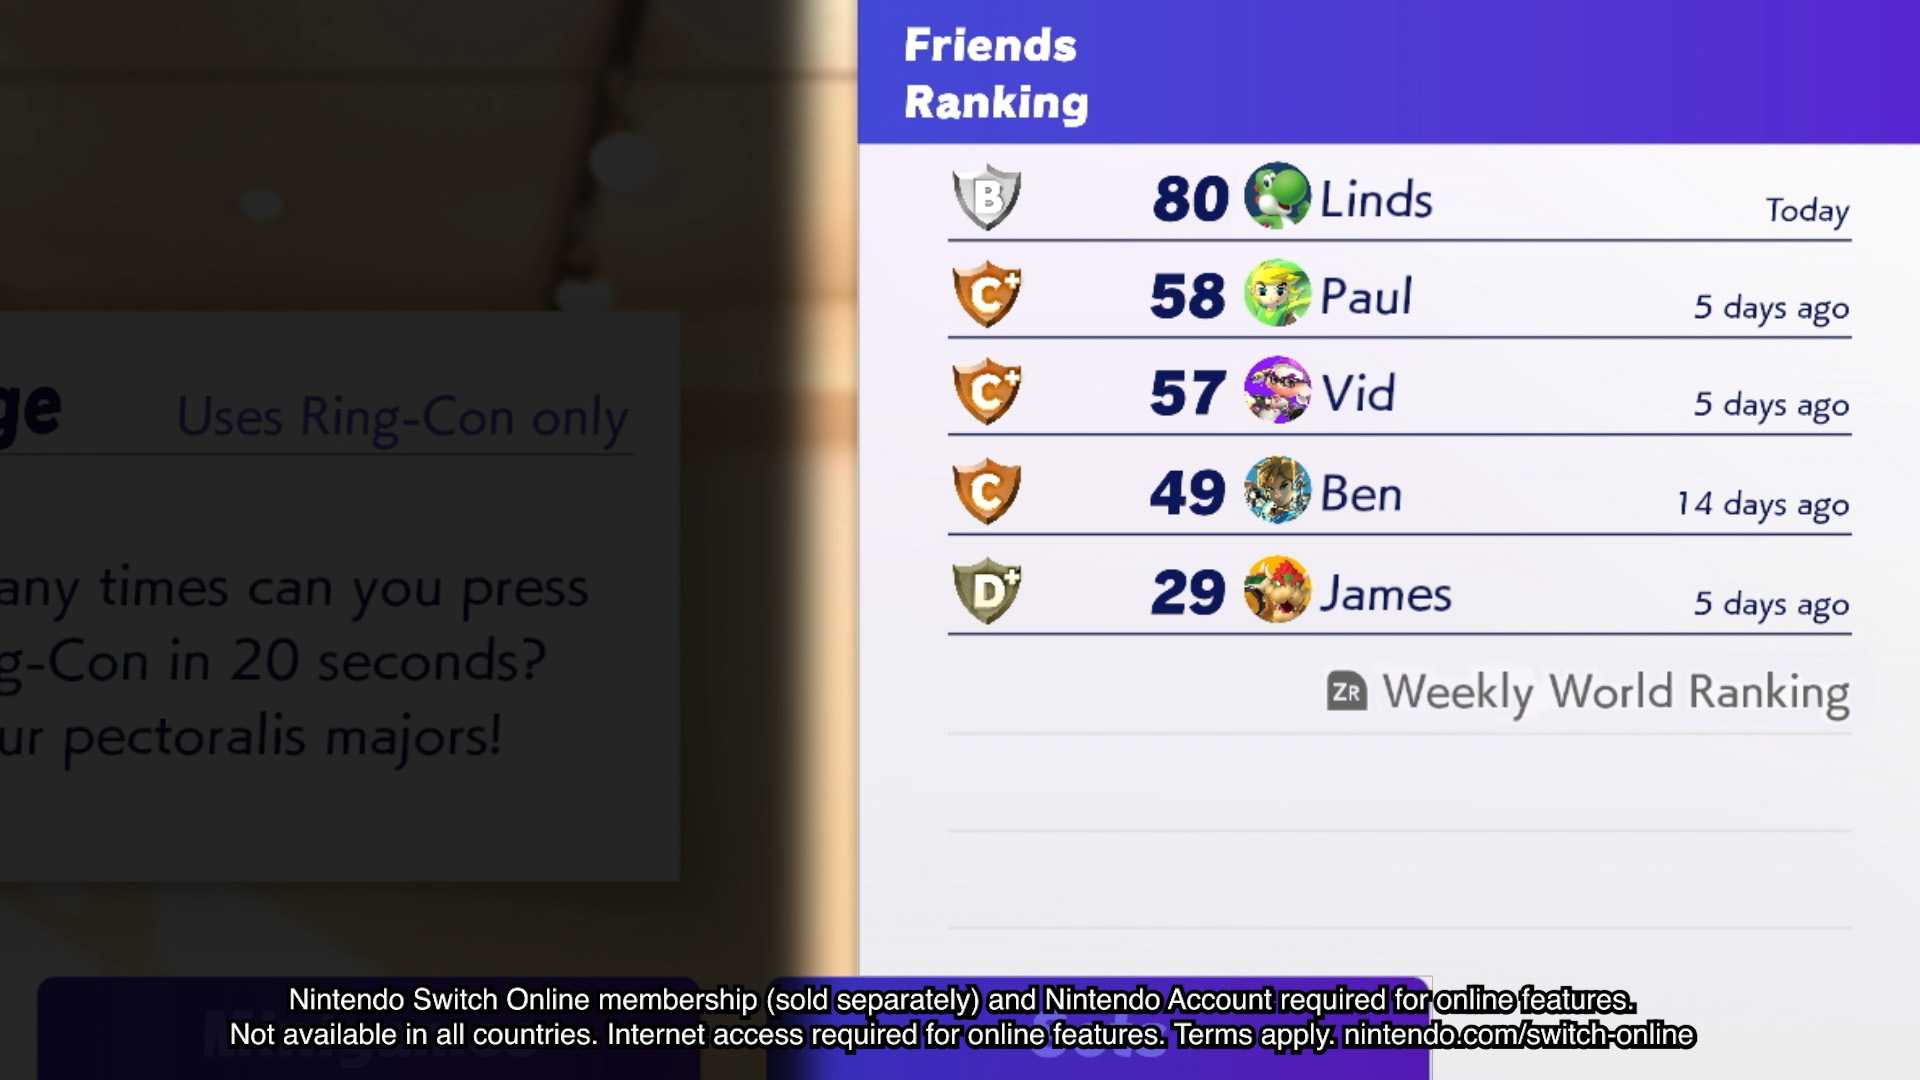 Compare Scores with Friends and Family